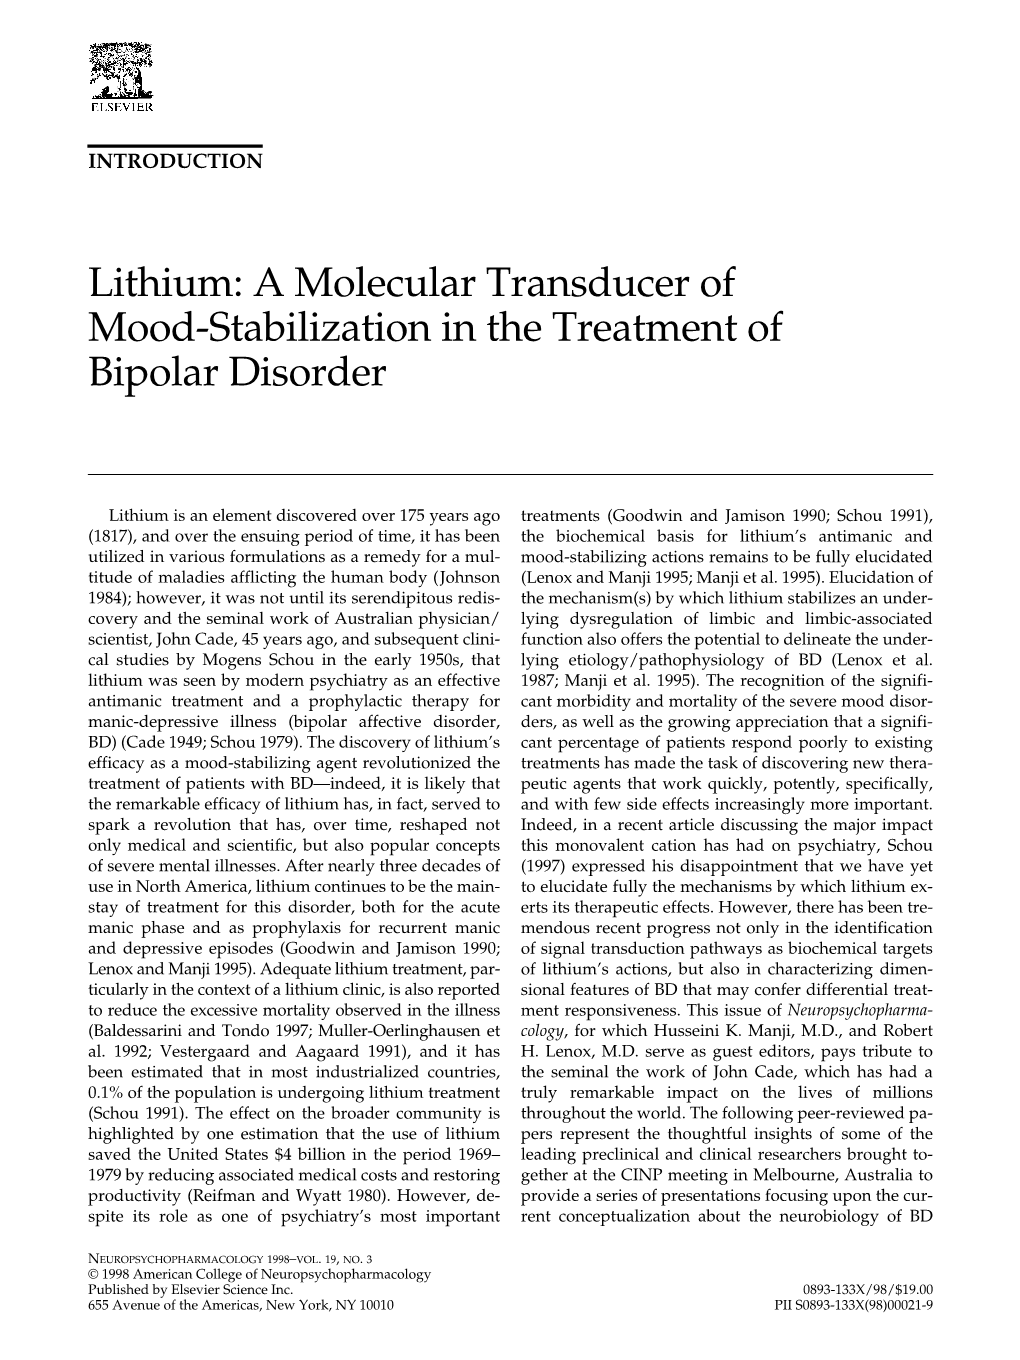 Lithium: a Molecular Transducer of Mood-Stabilization in the Treatment of Bipolar Disorder